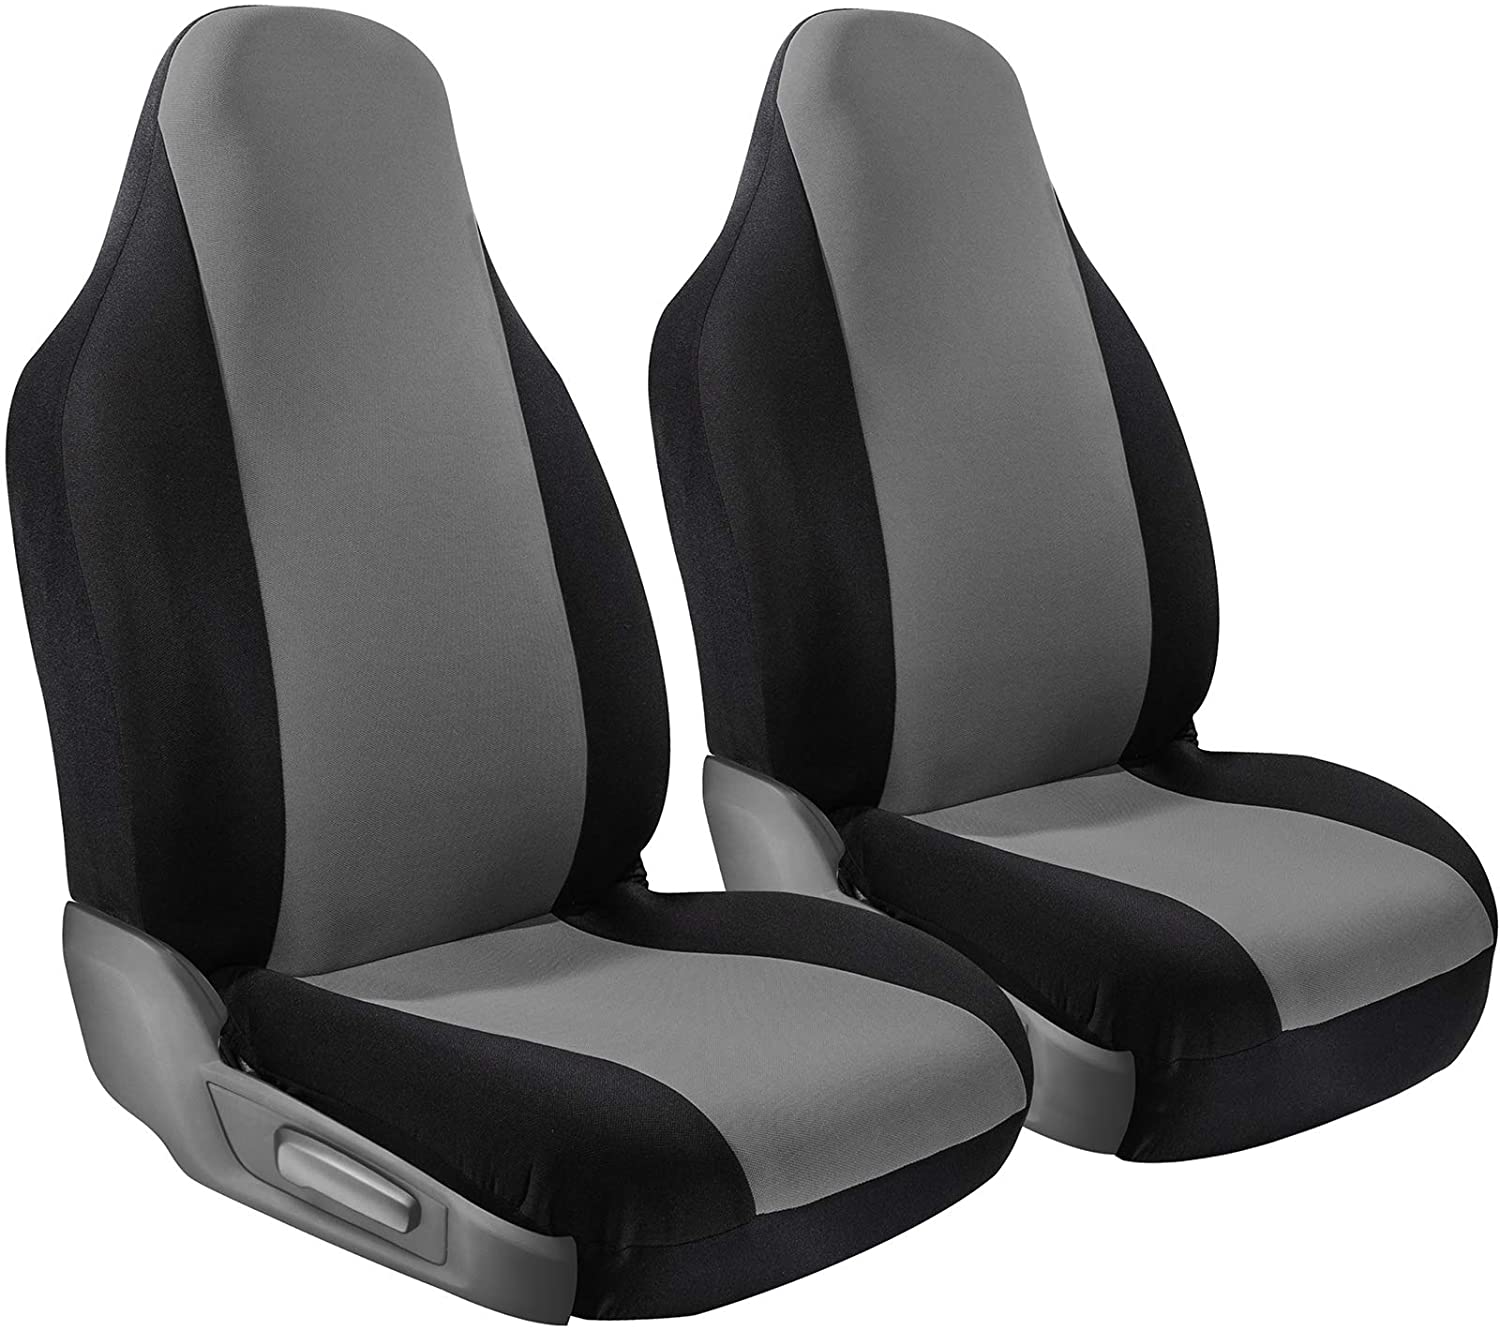 10 Best Seat Covers For Toyota Tacoma